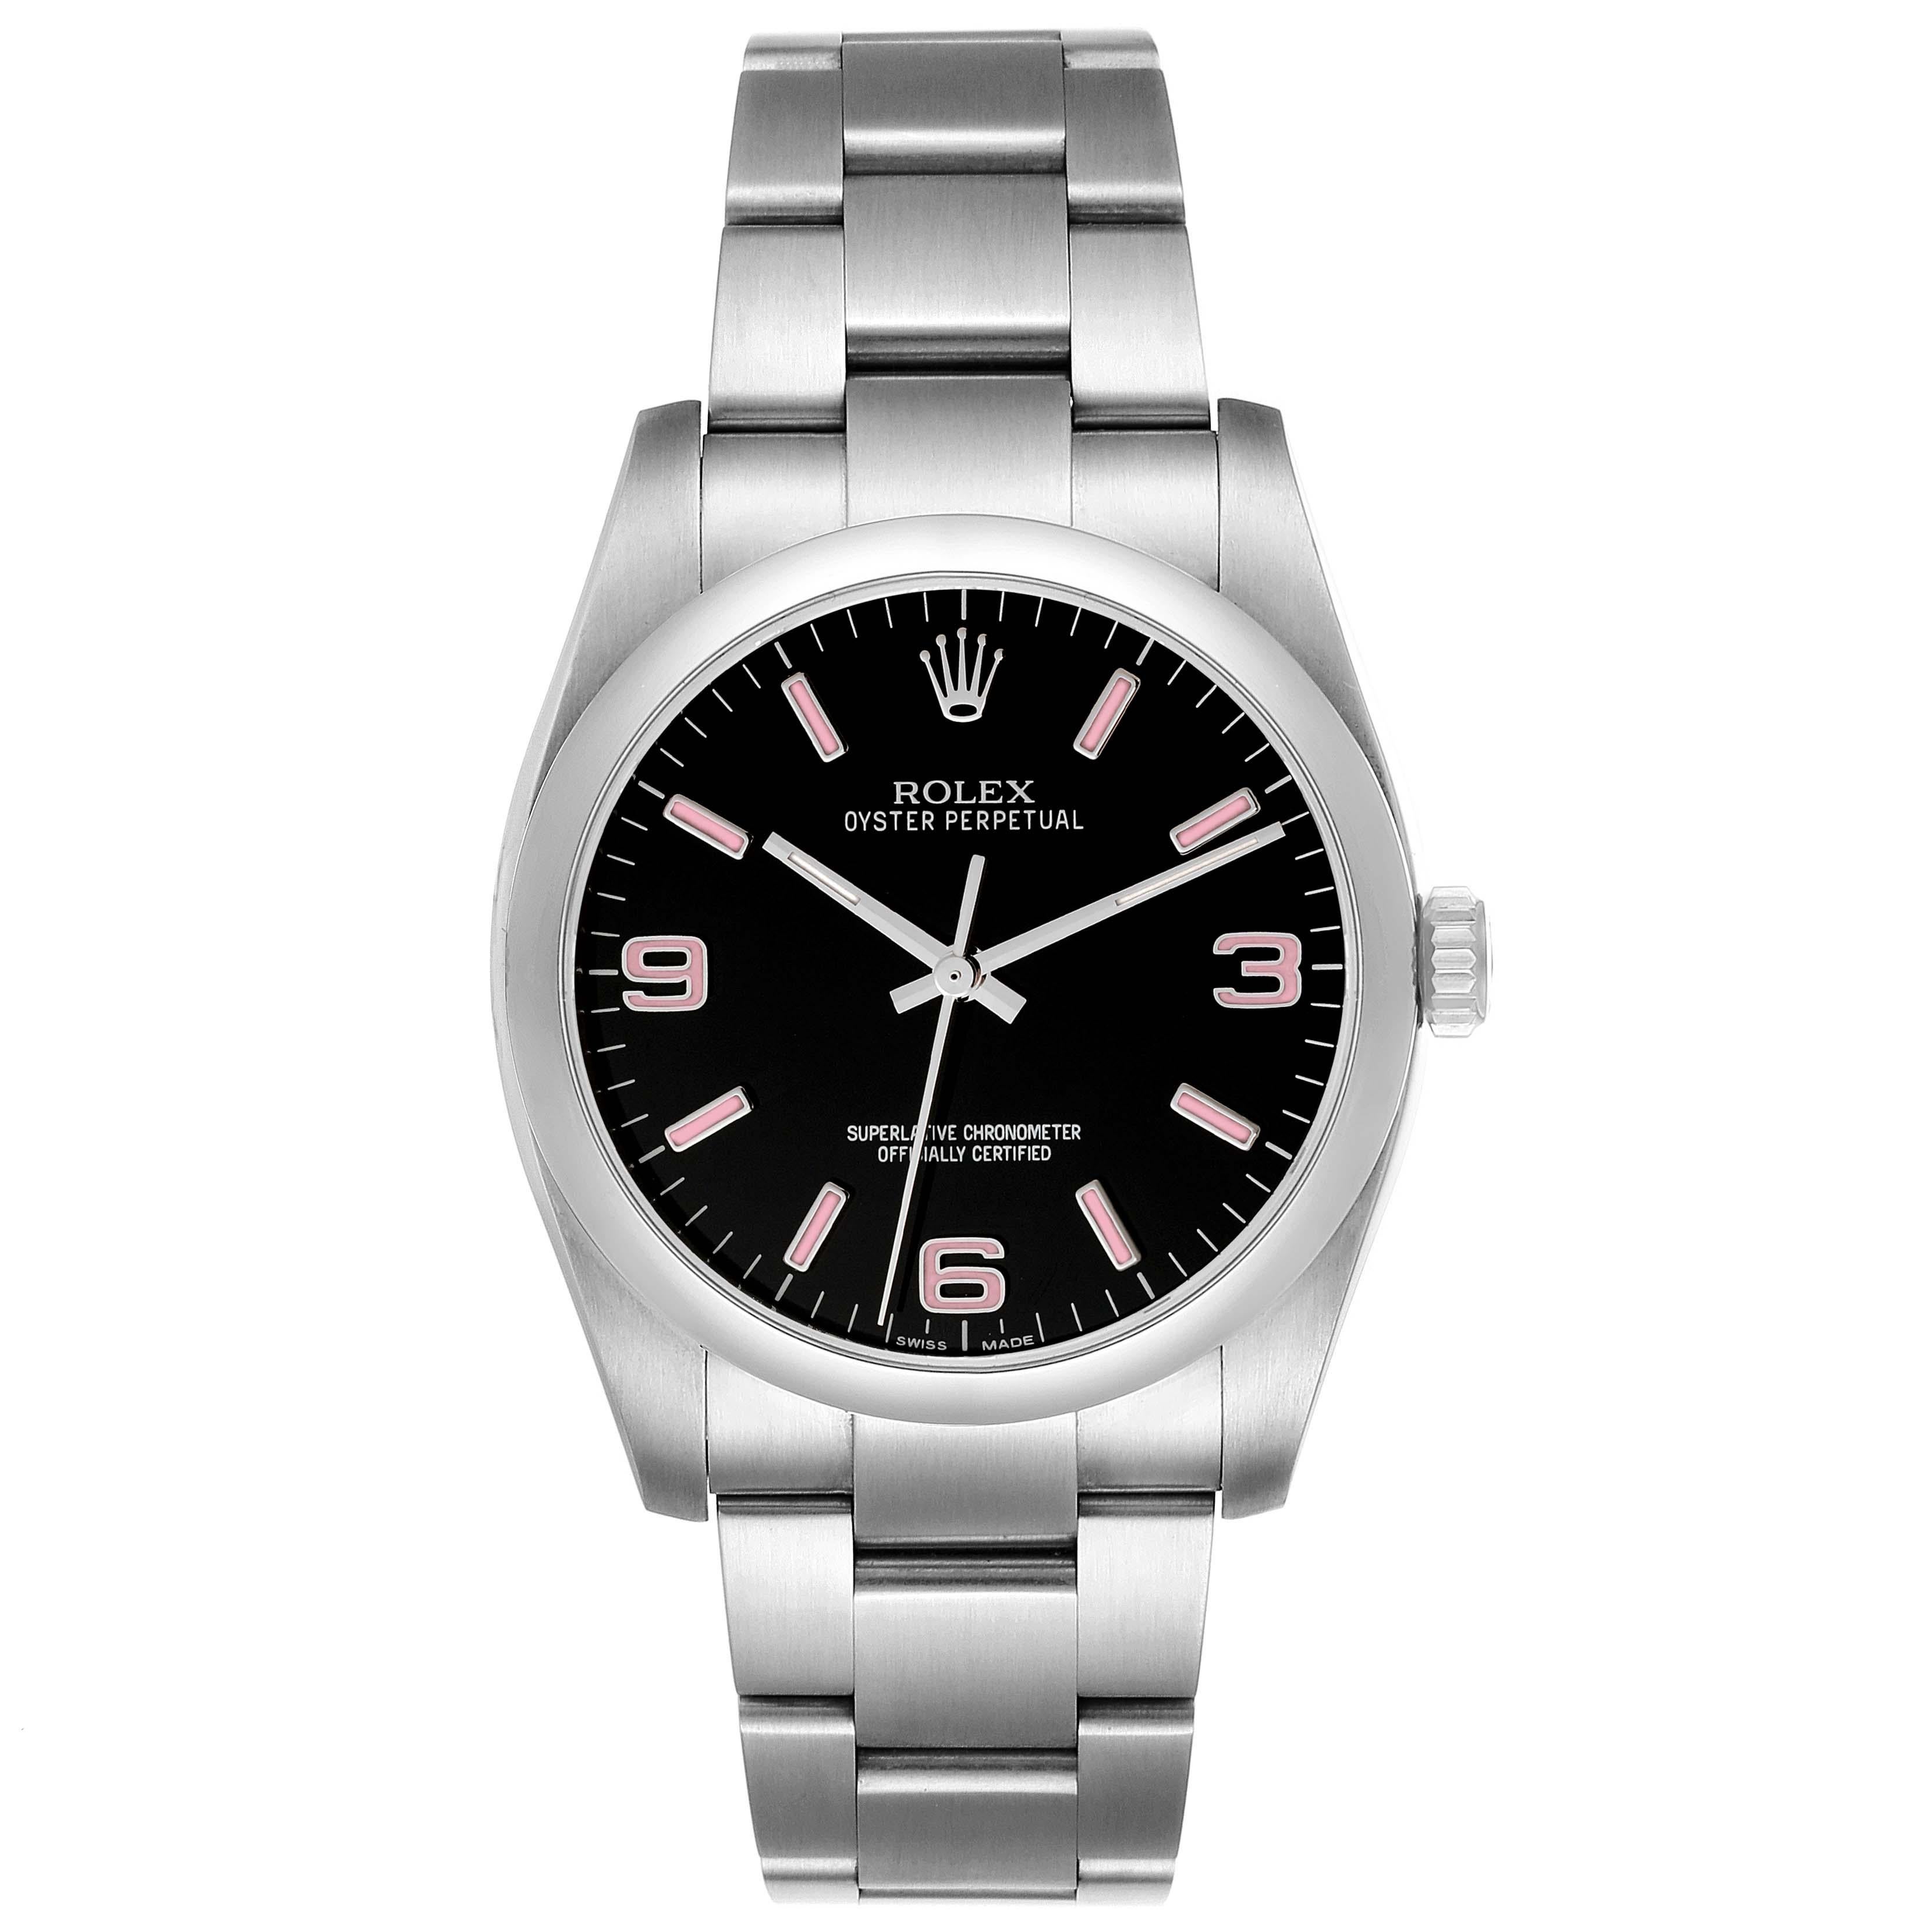 Rolex Oyster Perpetual 36 Pink Baton Black Dial Steel Mens Watch 116000 Box Card. Officially certified chronometer self-winding movement. Stainless steel case 36.0 mm in diameter. Rolex logo on a crown. Stainless steel smooth domed bezel. Scratch